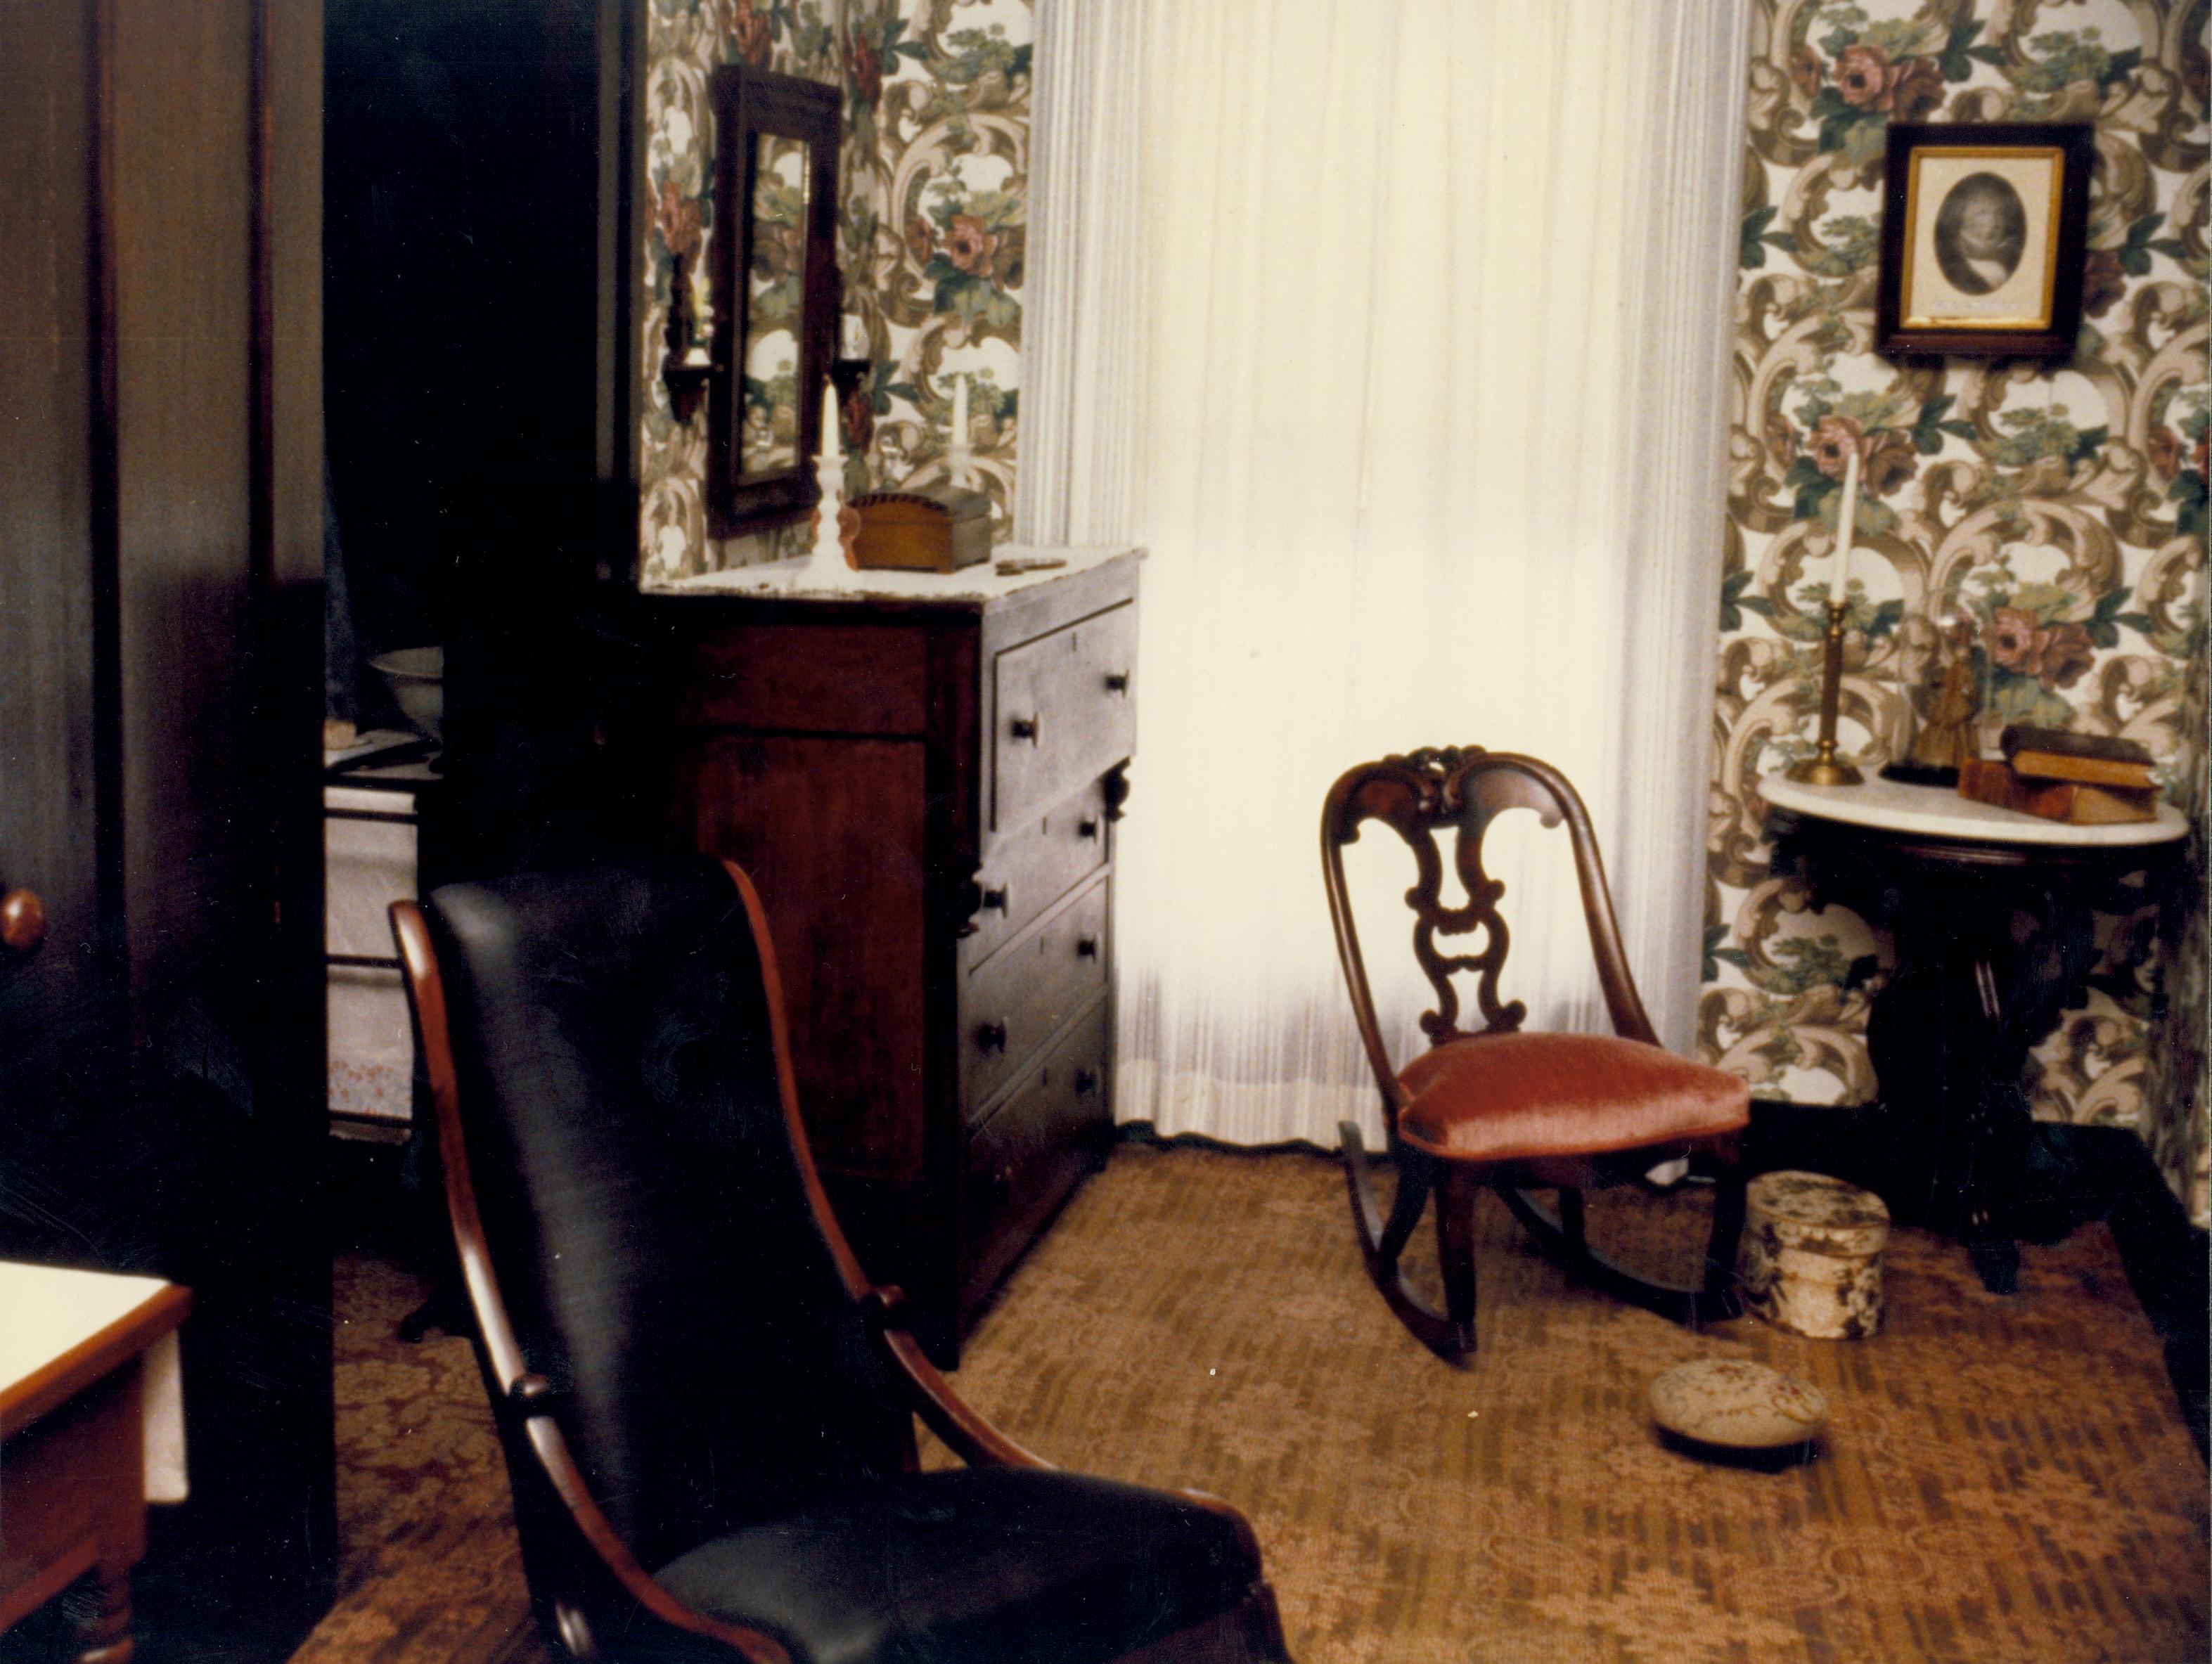 NA Lincoln, Home, Mrs., Mary, bedroom, chair